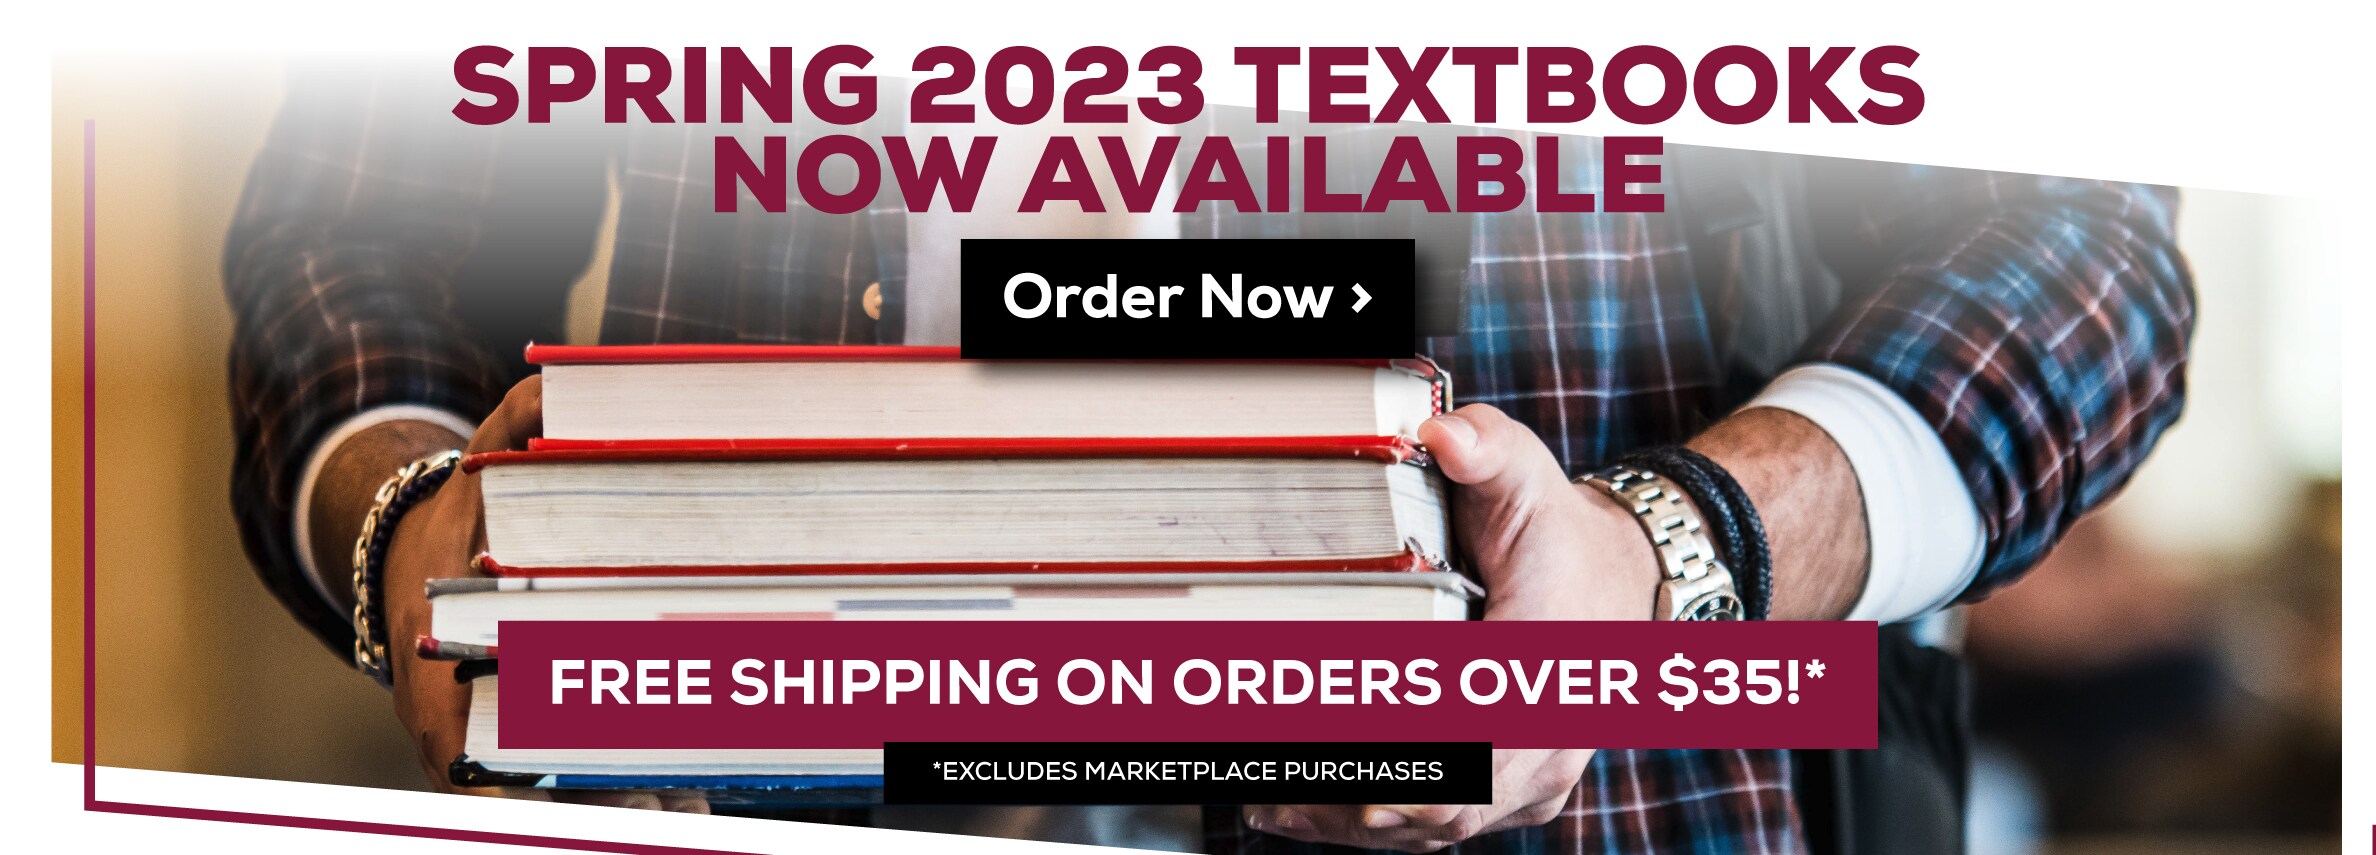 Spring 2023 Textbooks Now Available. Free shipping on all orders over $35! Excludes marketplace purchases. Order Now.